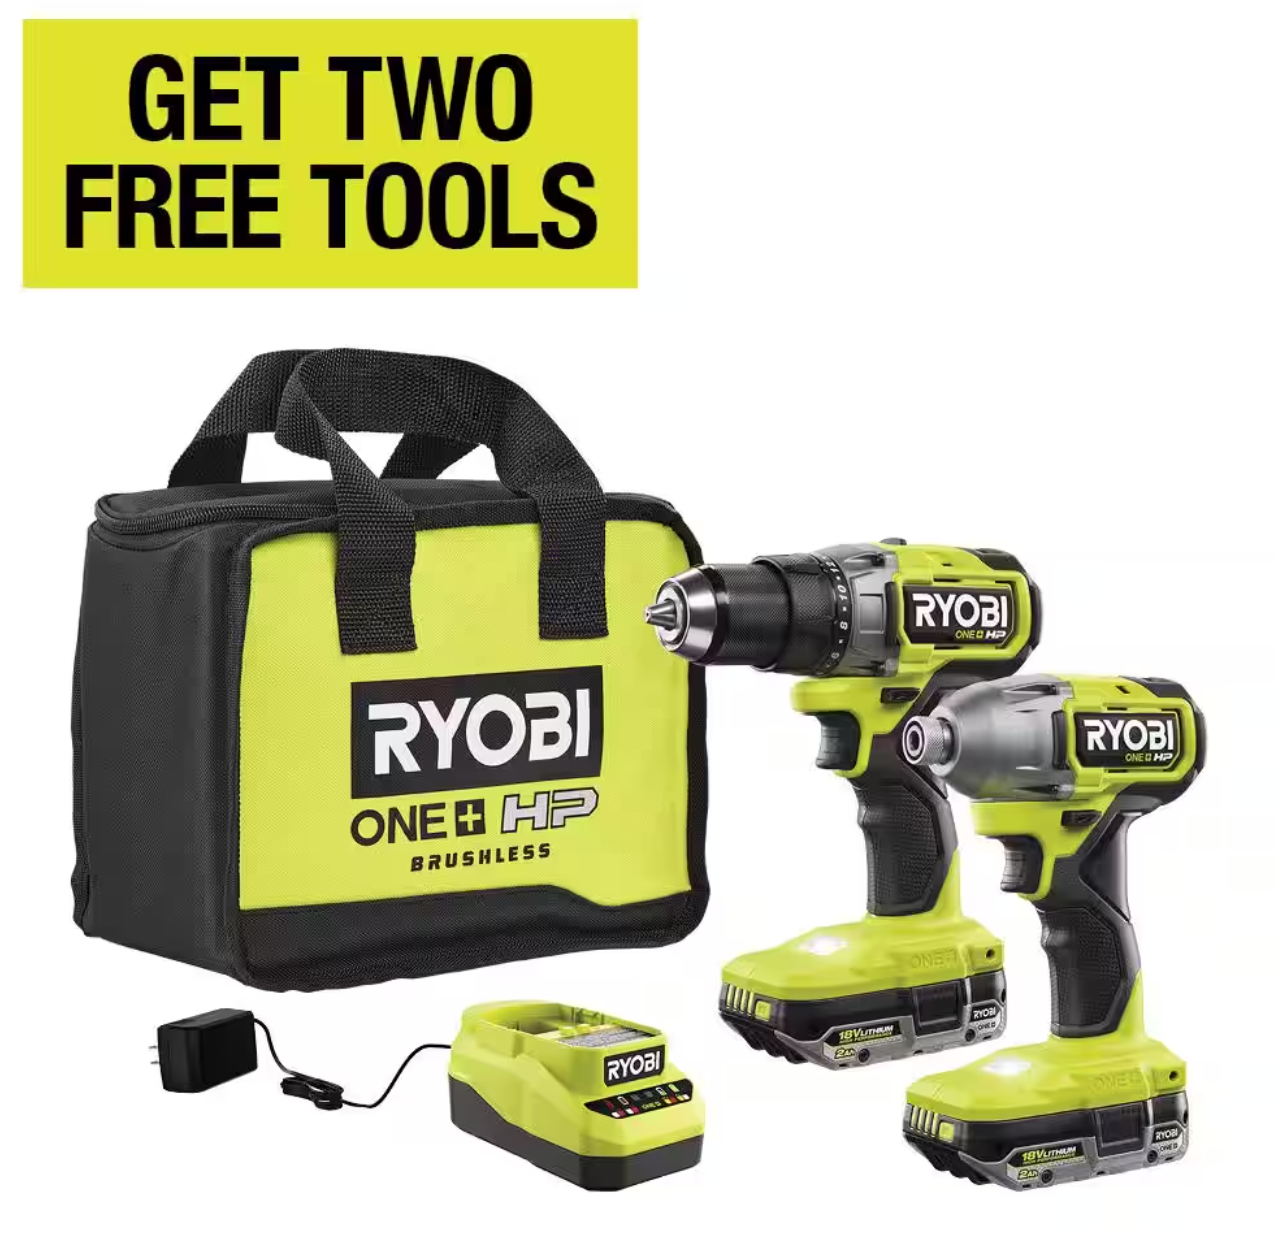 Ryobi ONE+ HP 18V 1/2" Drill and Impact Driver Kit + Free Tools for $199